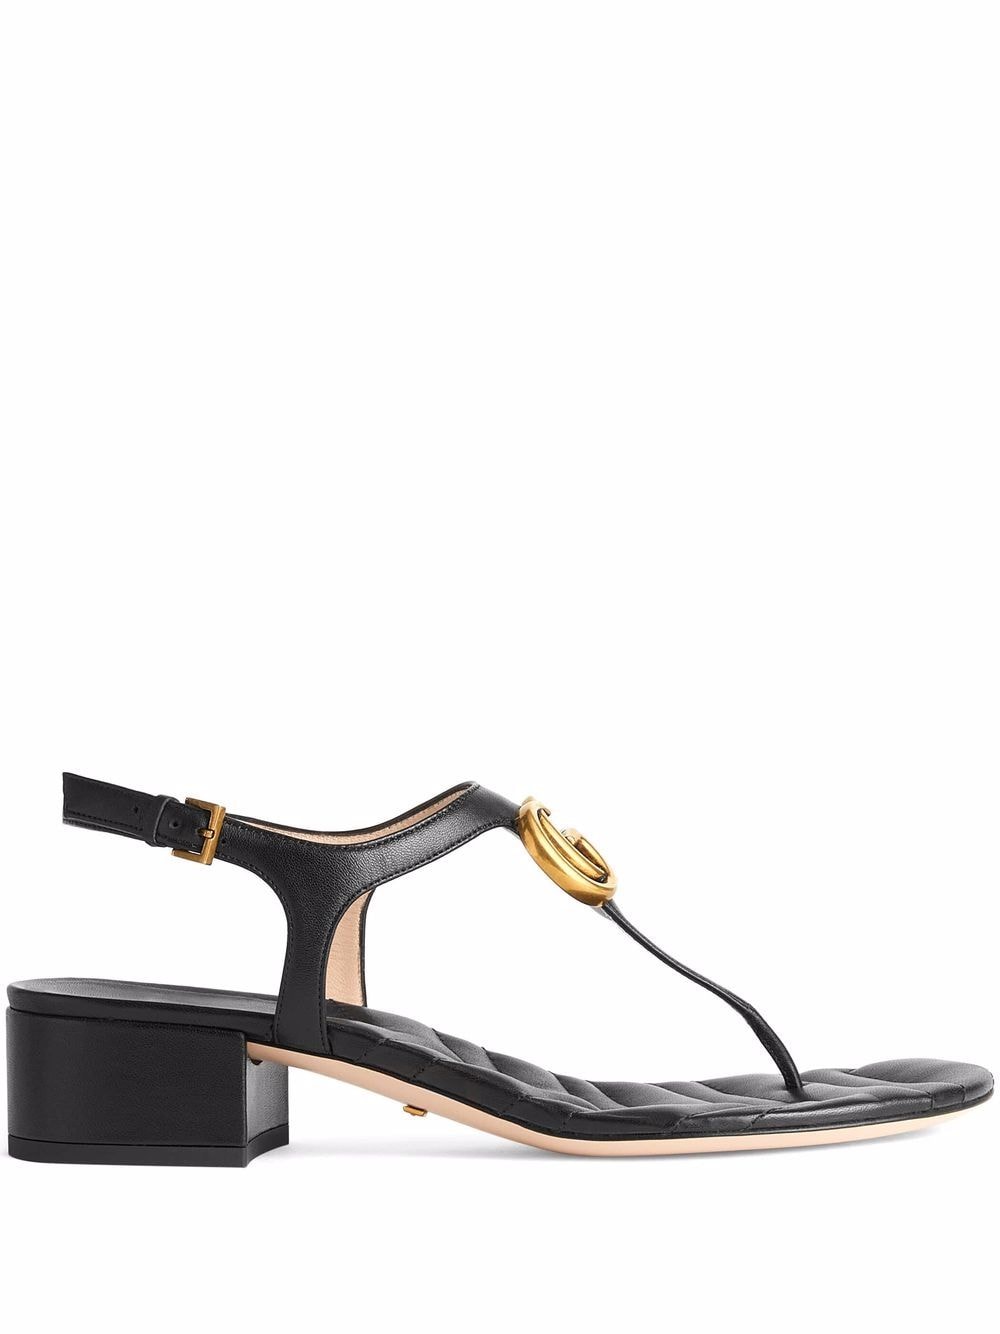 GUCCI Double G leather sandals